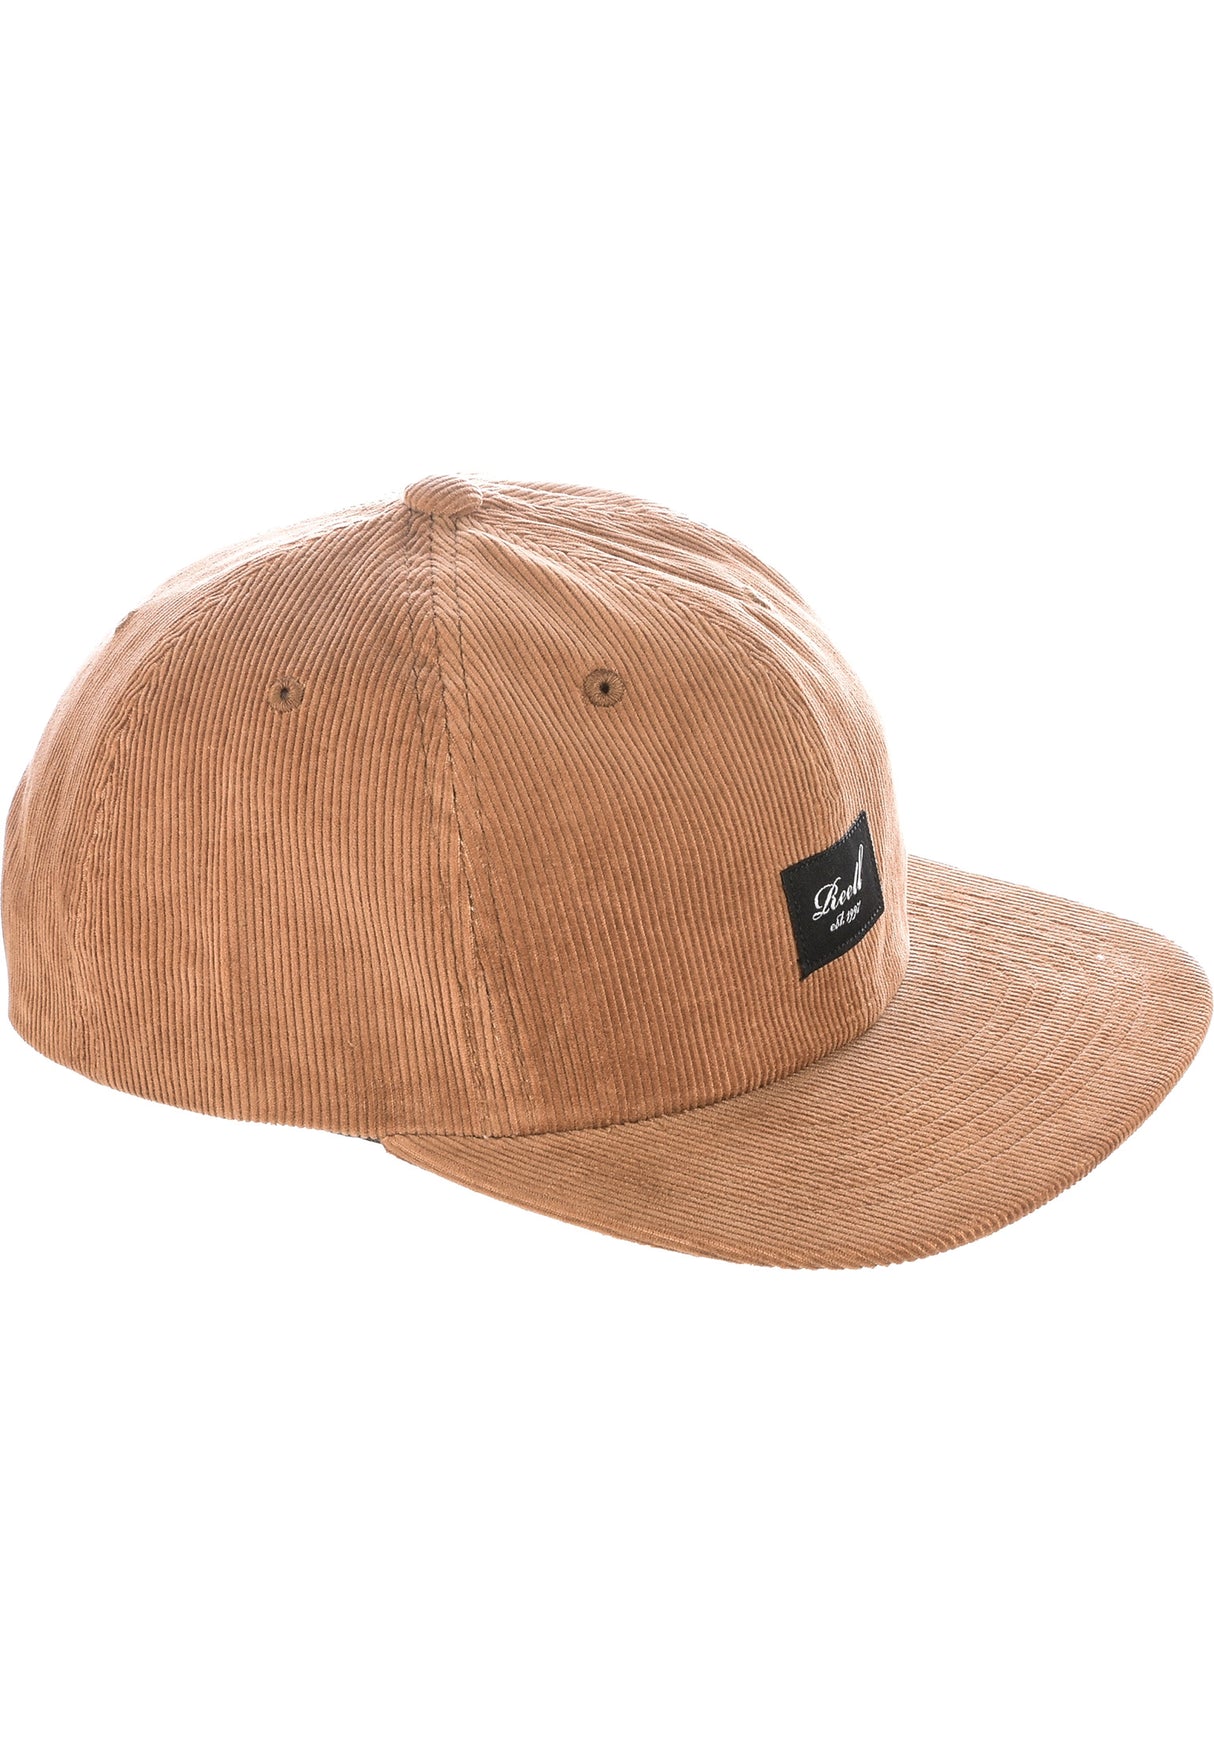 Flat 6 Panel copperbrown-cord Close-Up2